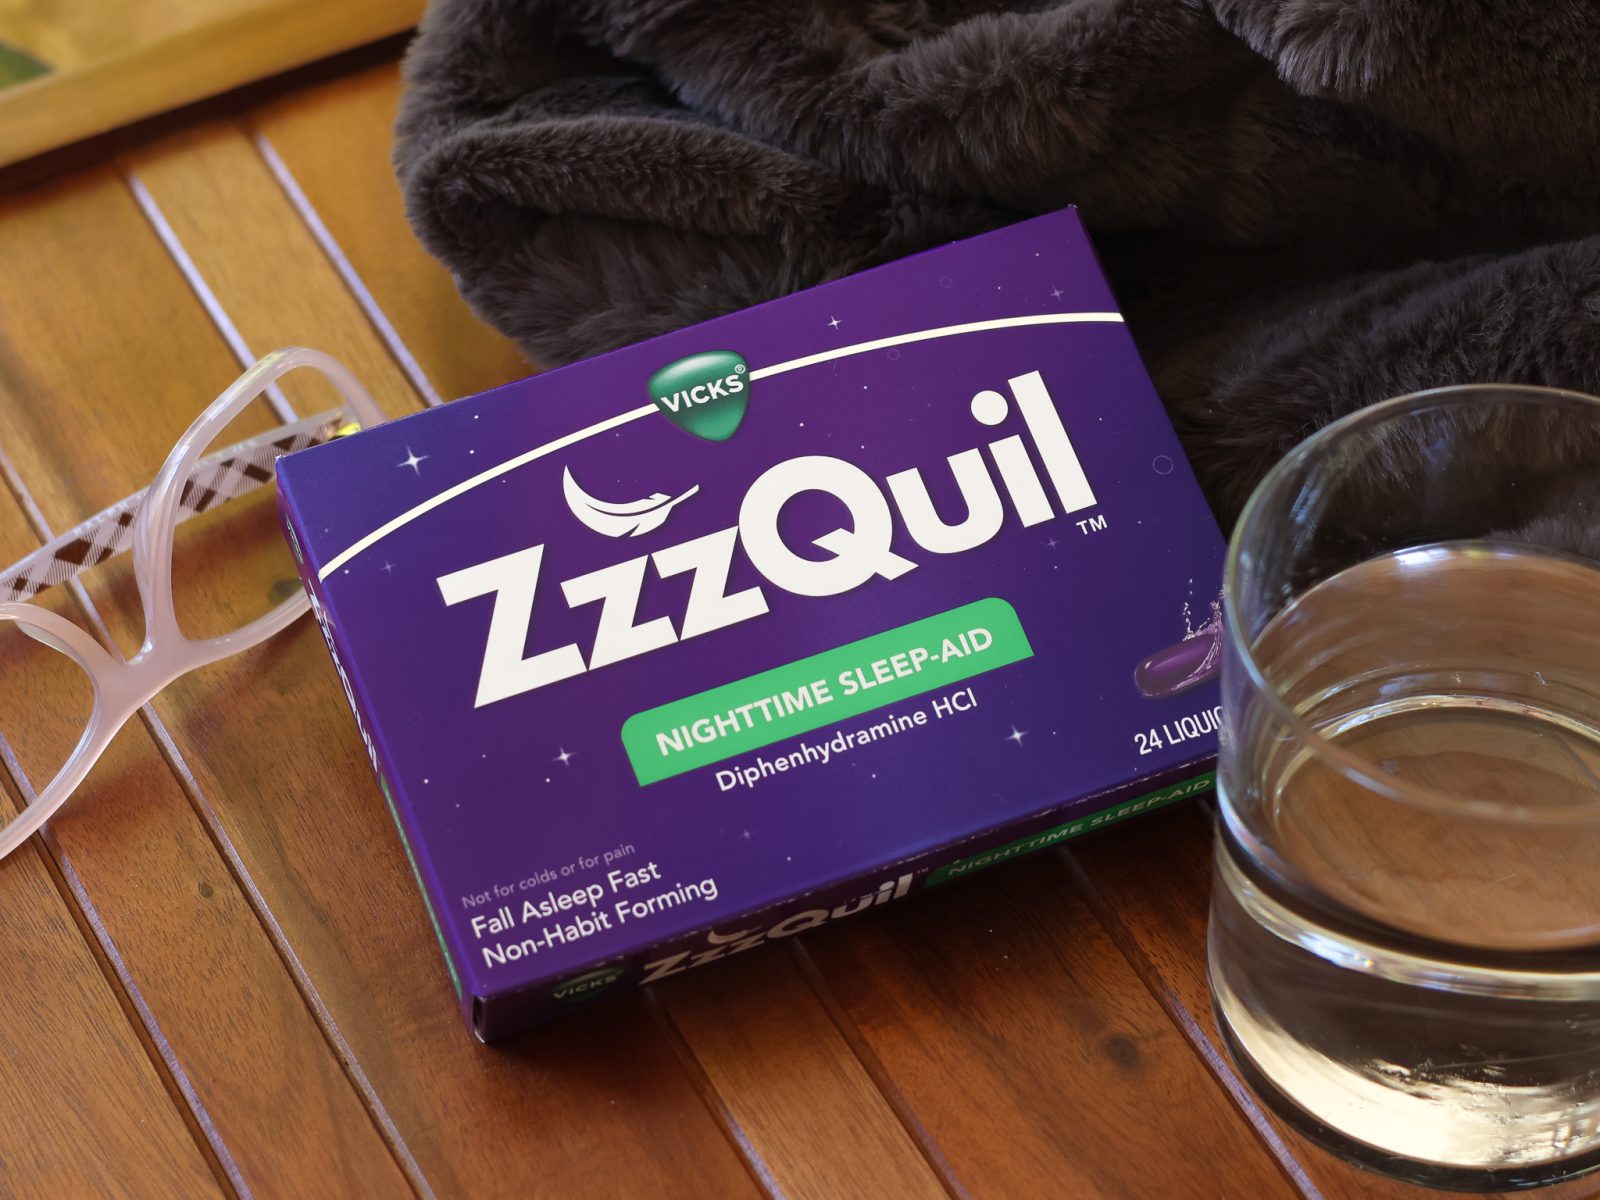 Get Vicks ZzzQuil For As Low As $6.99 At Kroger (Regular Price $9.99)